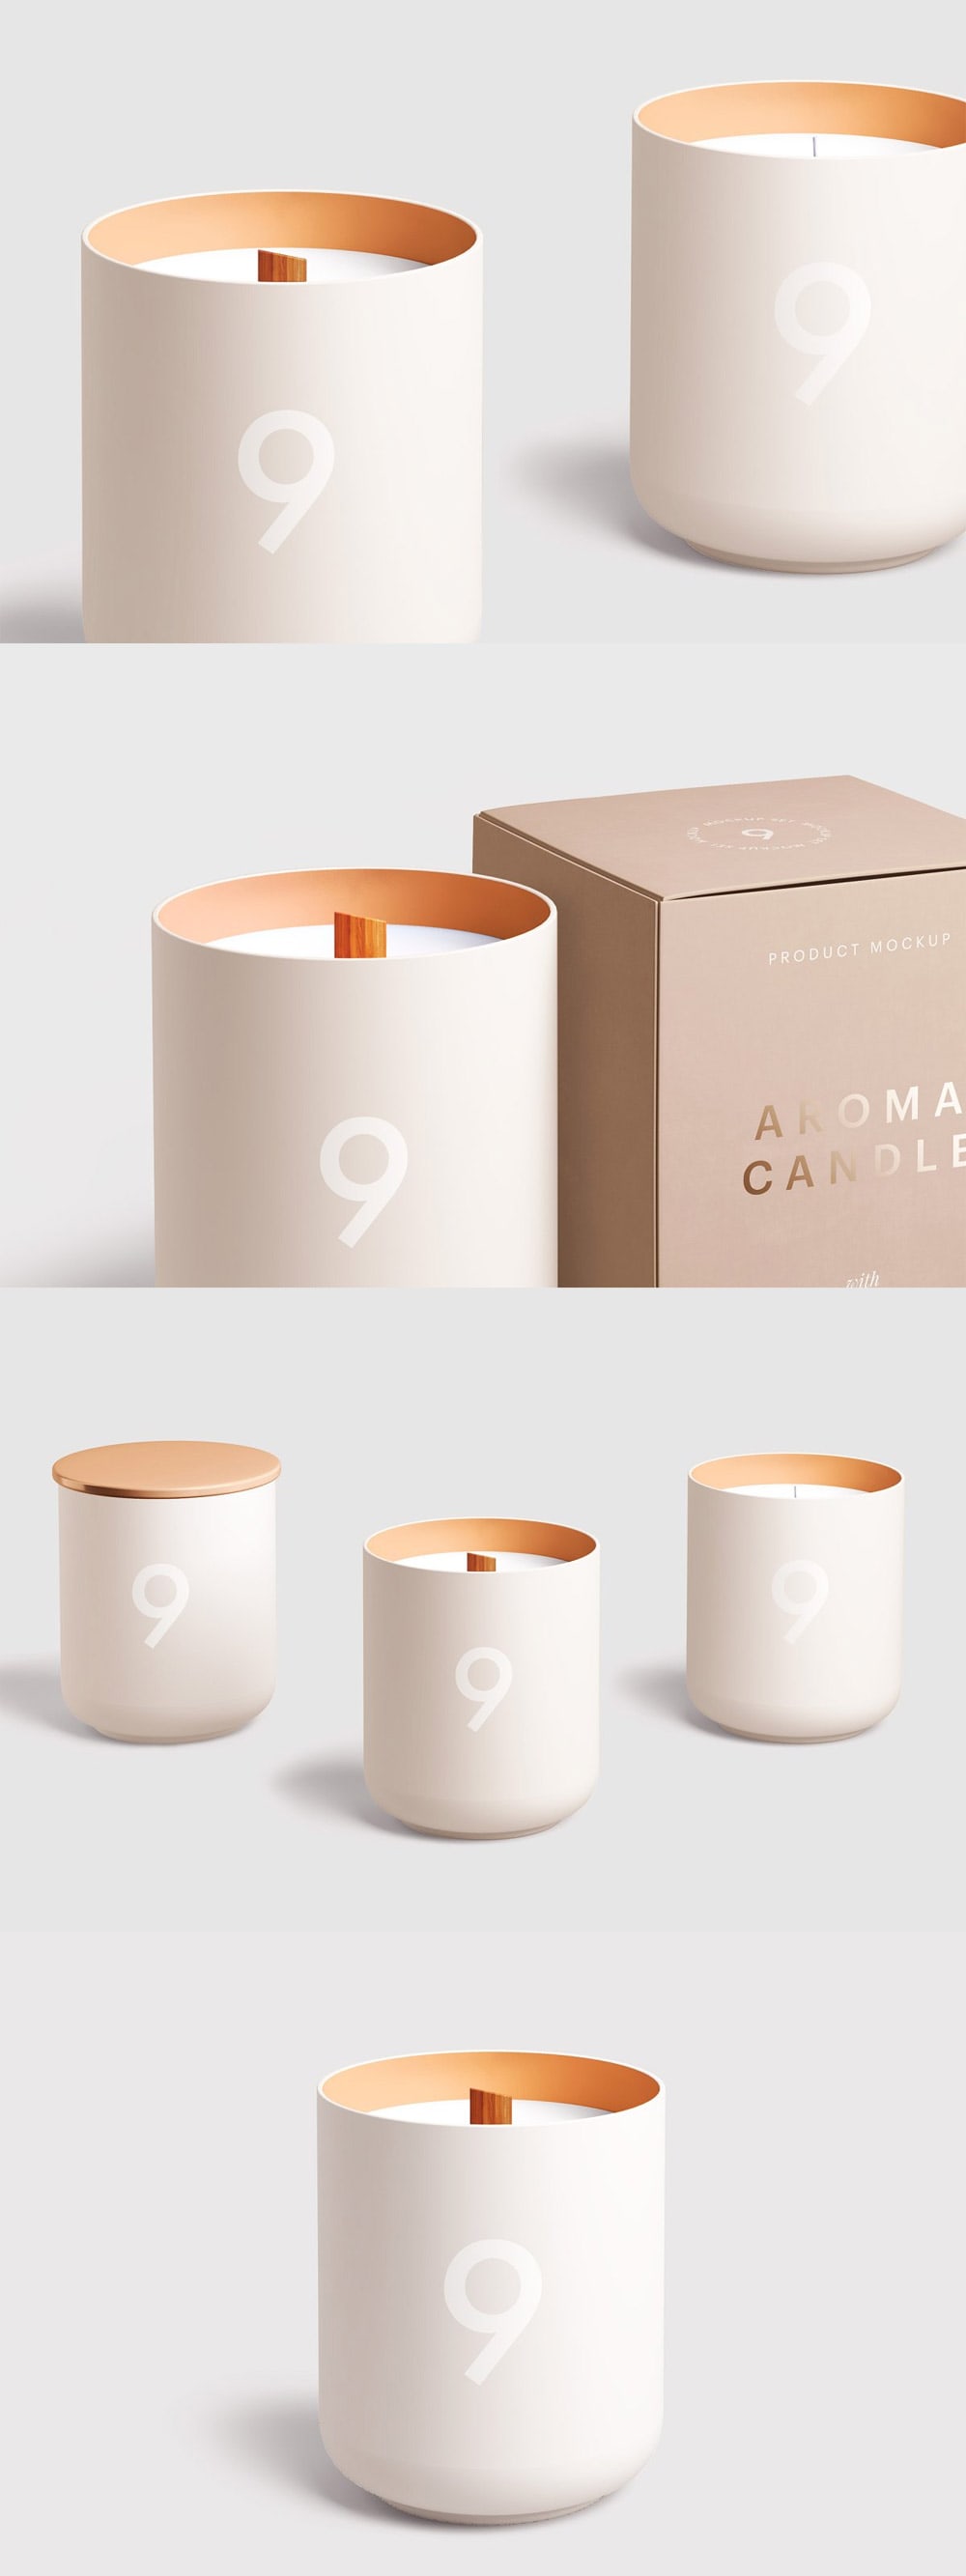 Candle Glass Package Mockup Set - Find the Perfect ...